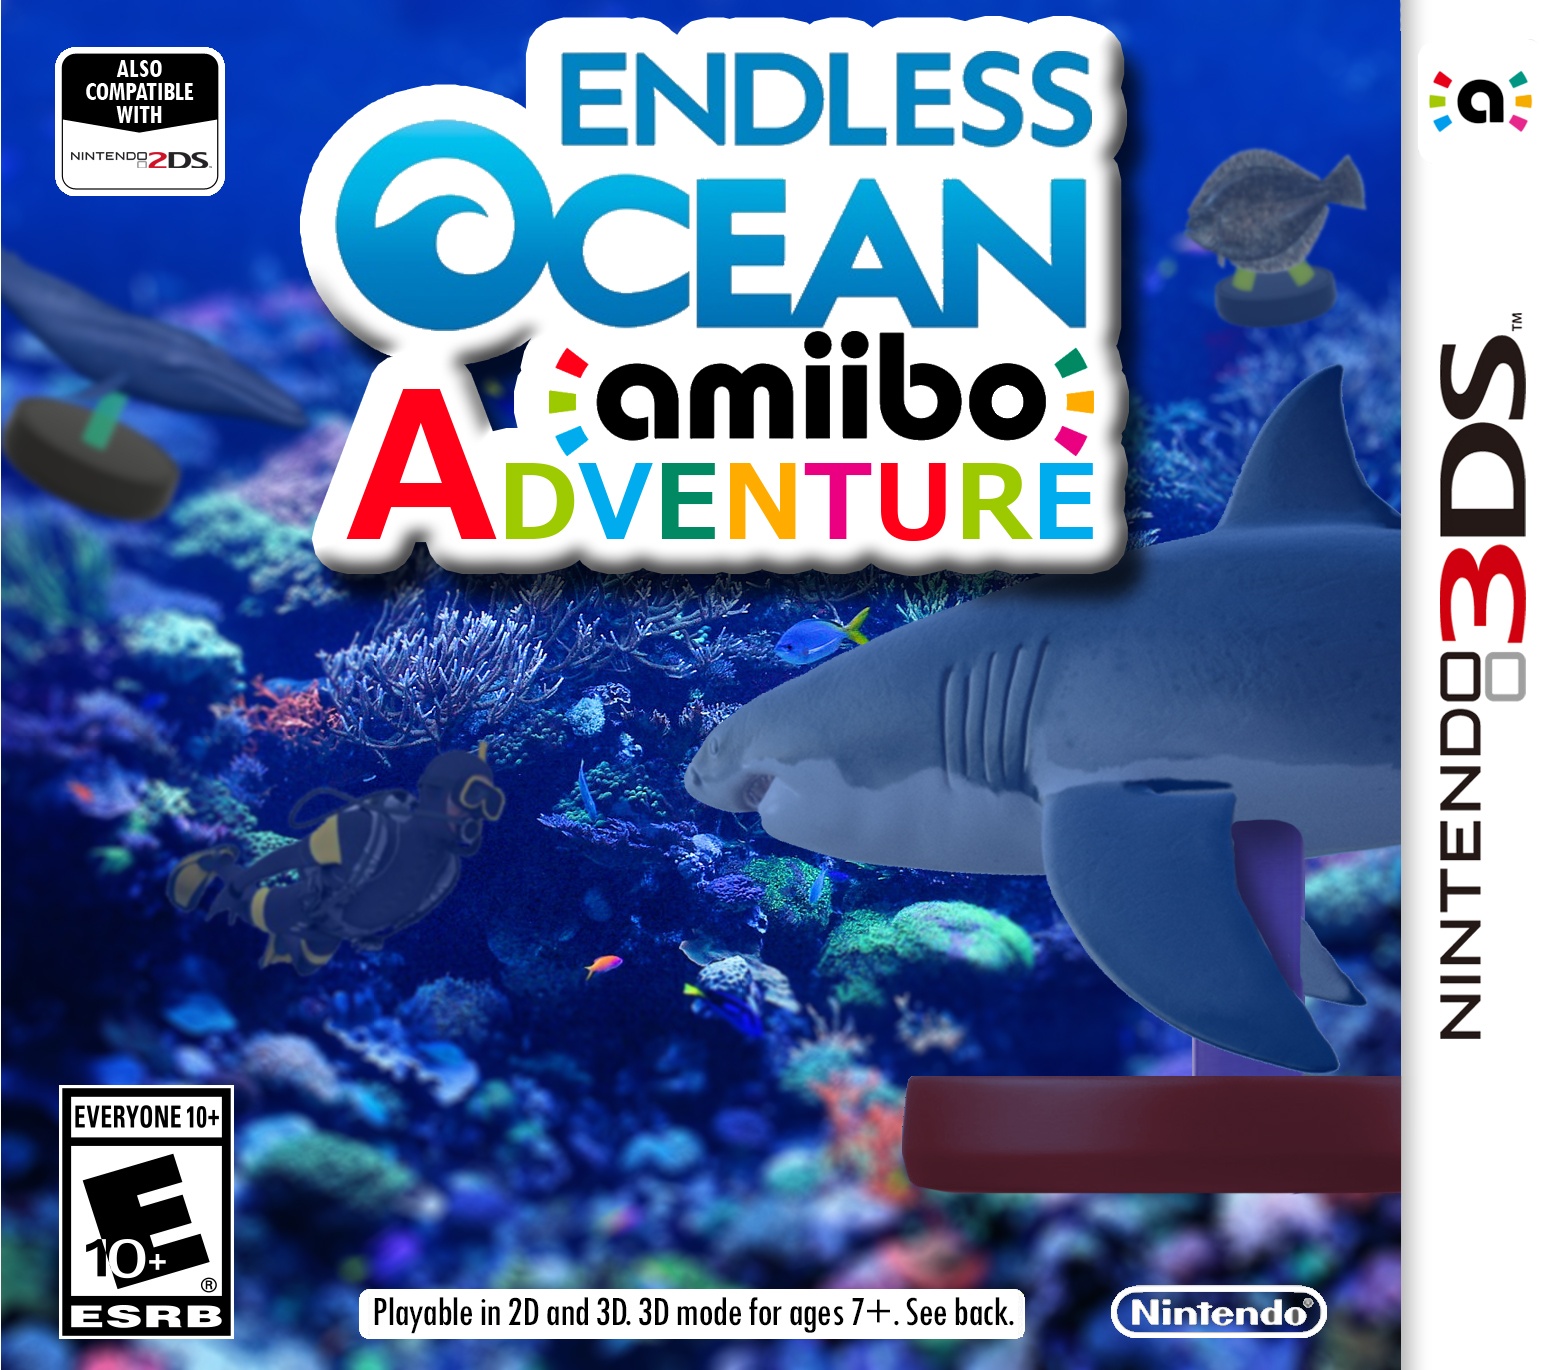 Viewing full size Endless Ocean Amiibo Adventure box cover